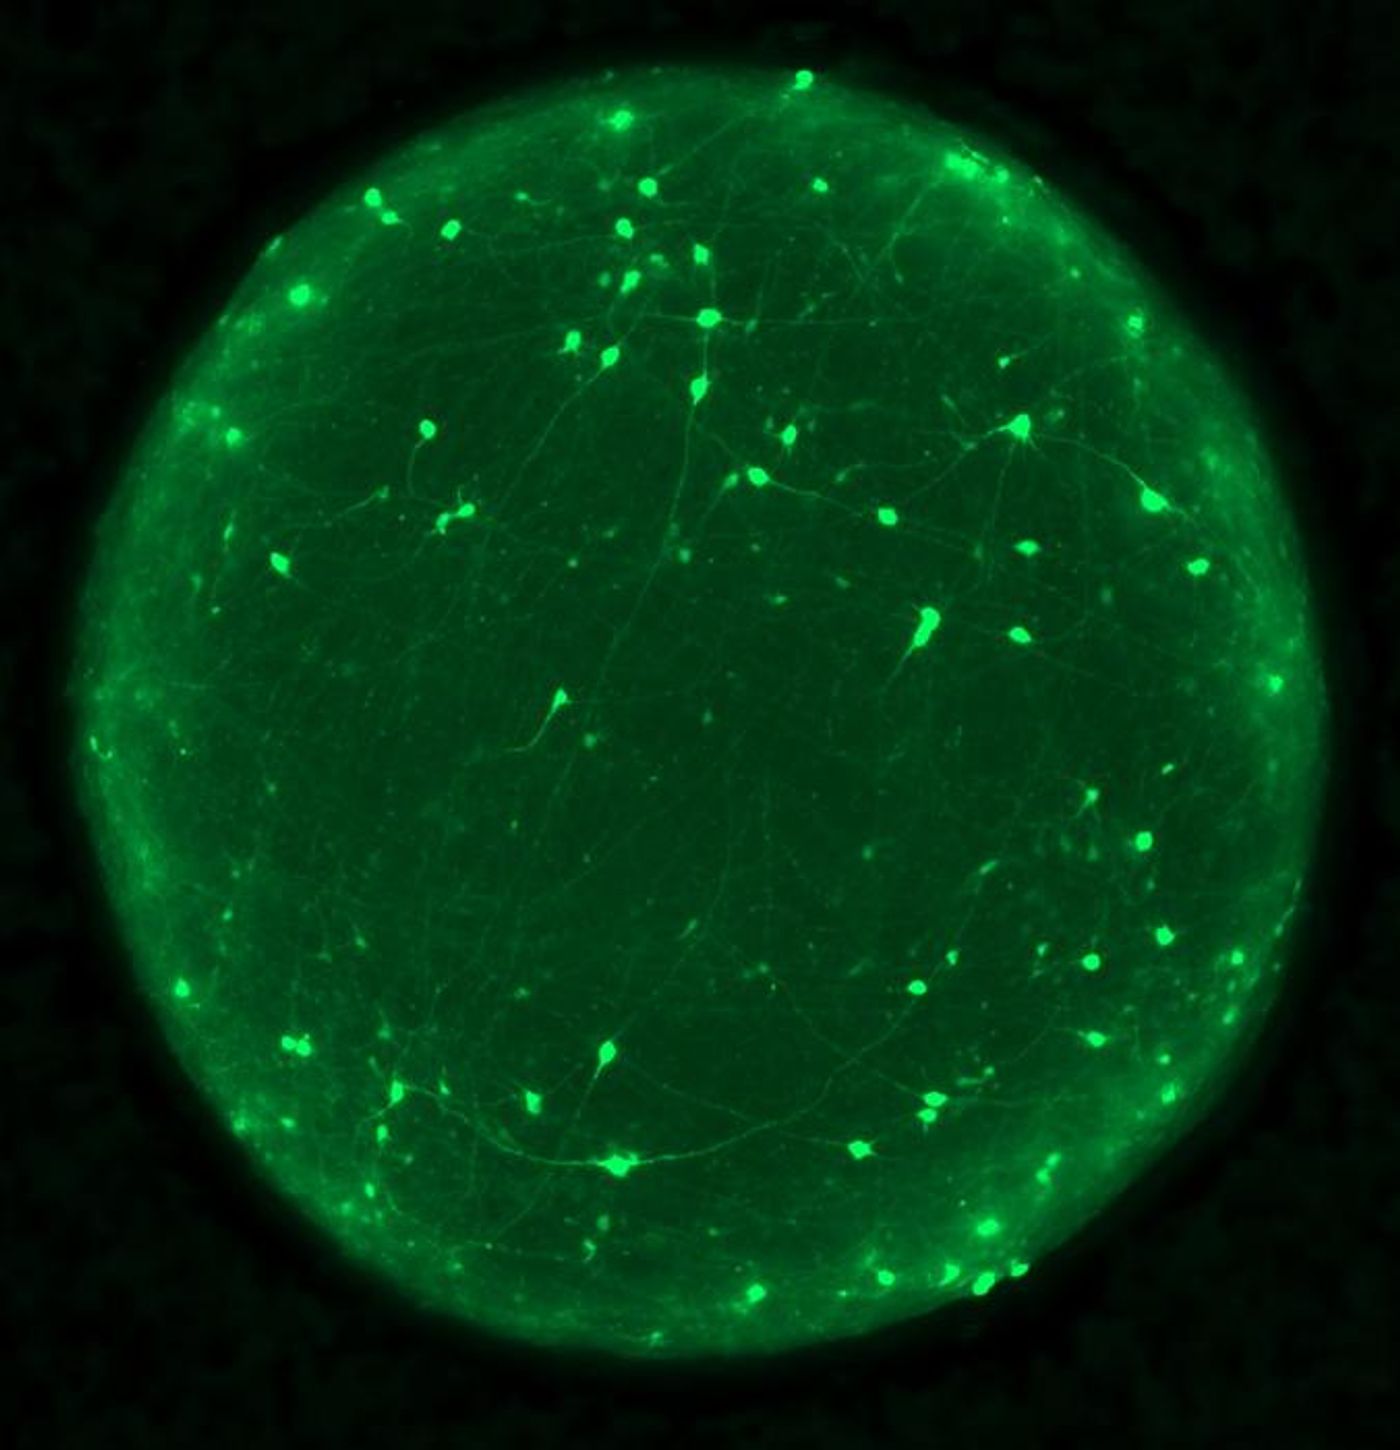 Organoid with neurons labeled in green / Credit: Josh Berlind CC BY-SA